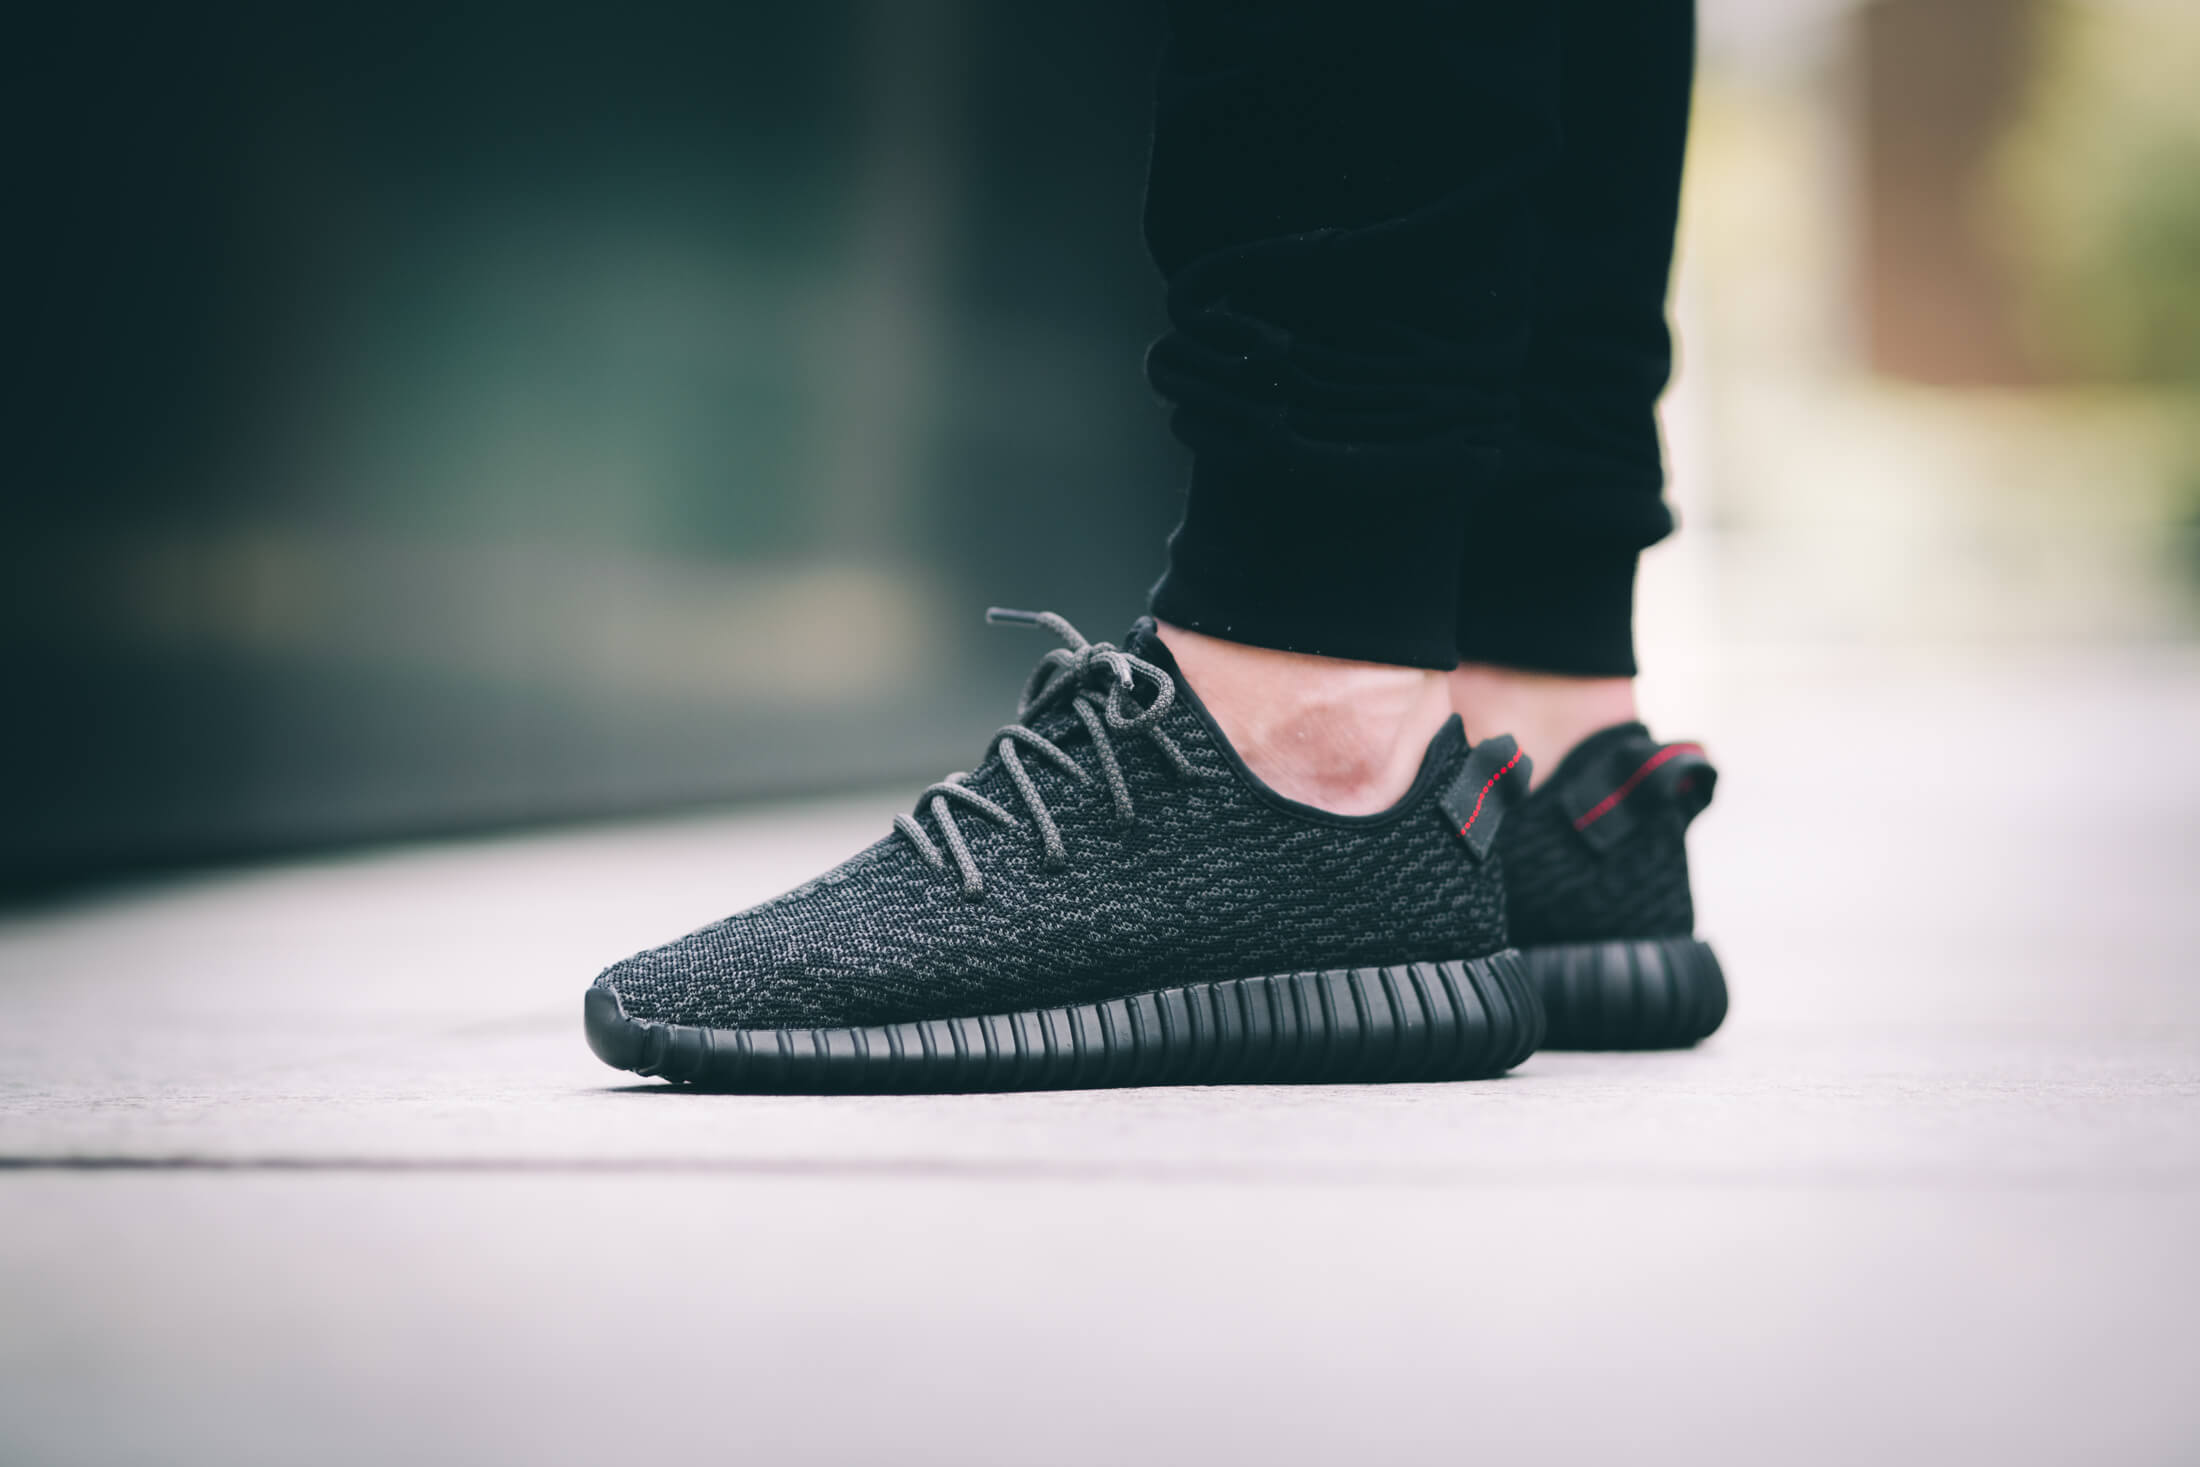 adidas Yeezy 350 Boost Black - Where To